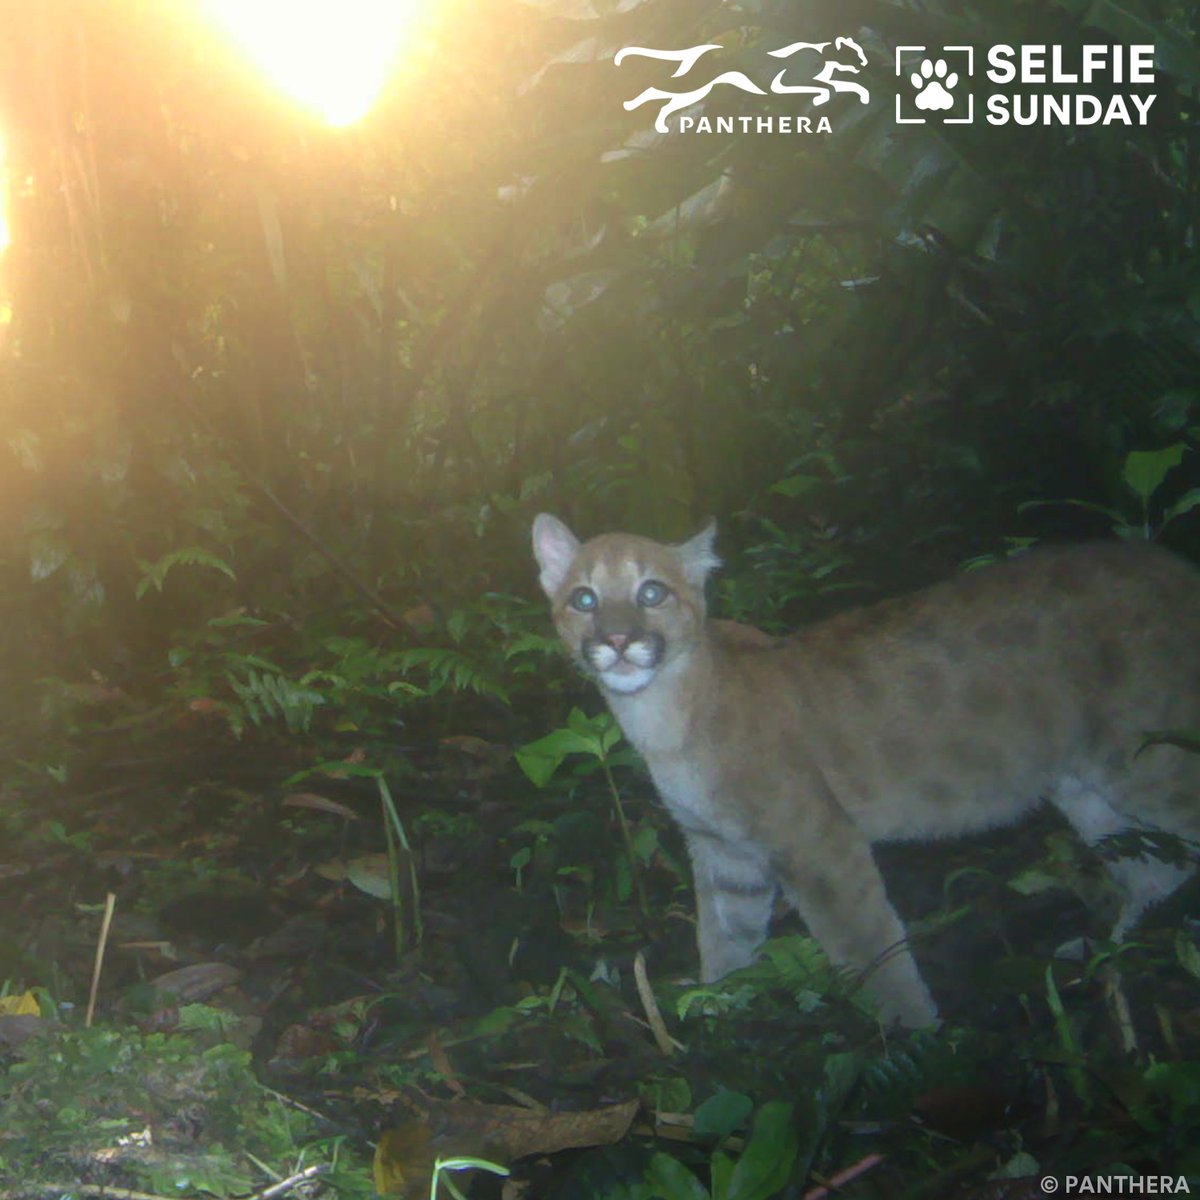 This young #SelfieSundaySpecies is losing its spots, but don't worry! Did you know that puma kittens are born with spots, which they gradually lose in their first two years? Learn more about Panthera's work in making roads safer for pumas in Costa Rica: bit.ly/3Fbsi4v